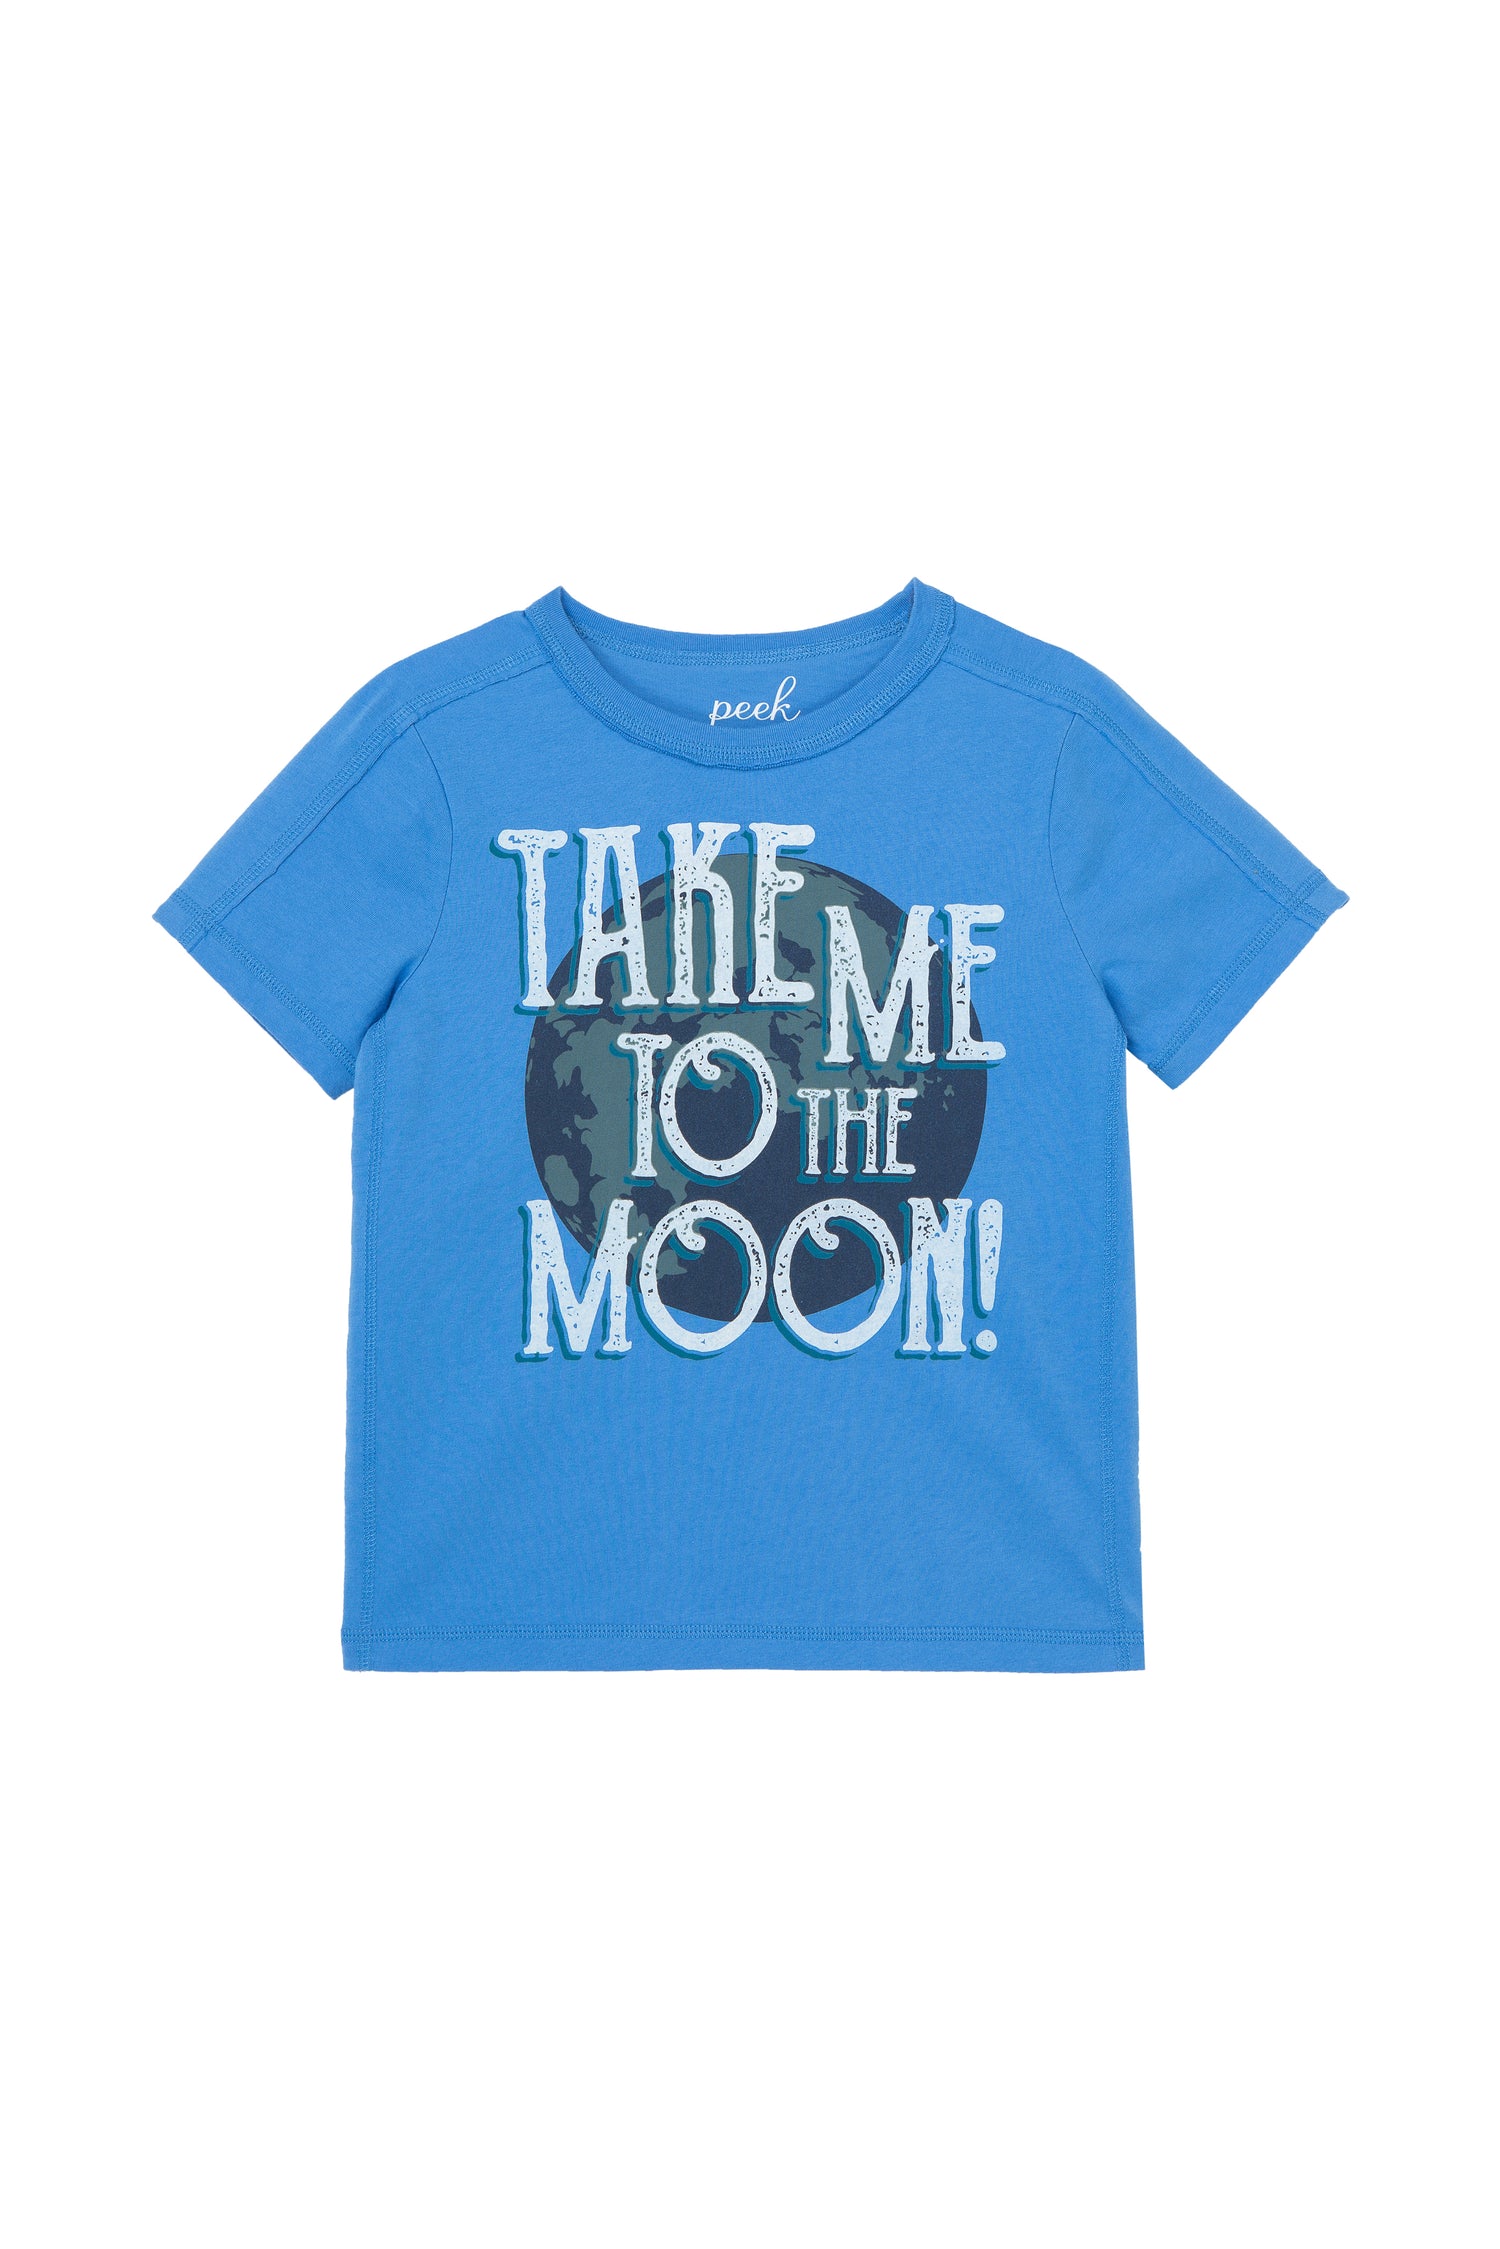 BLUE T-SHIRT WITH "TAKE ME TO THE MOON"